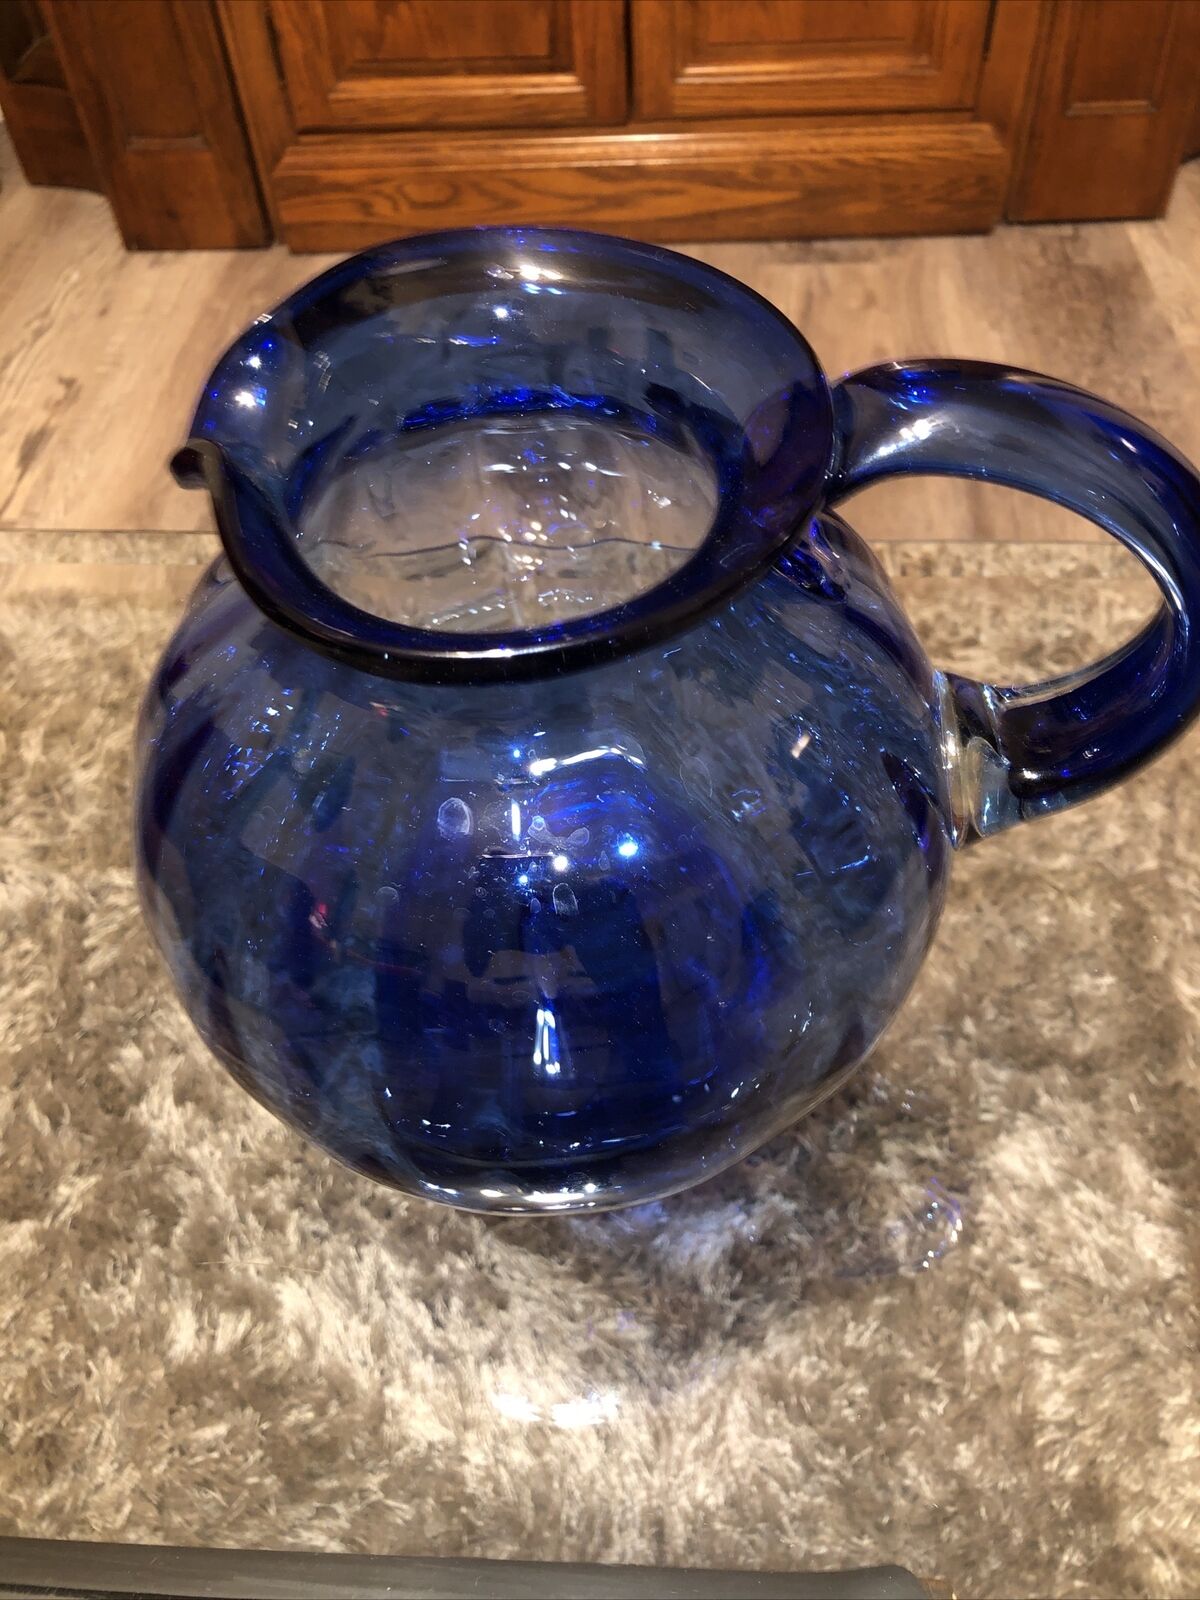 Blenko Style Glass Pitcher Cobalt Blue With Ripples